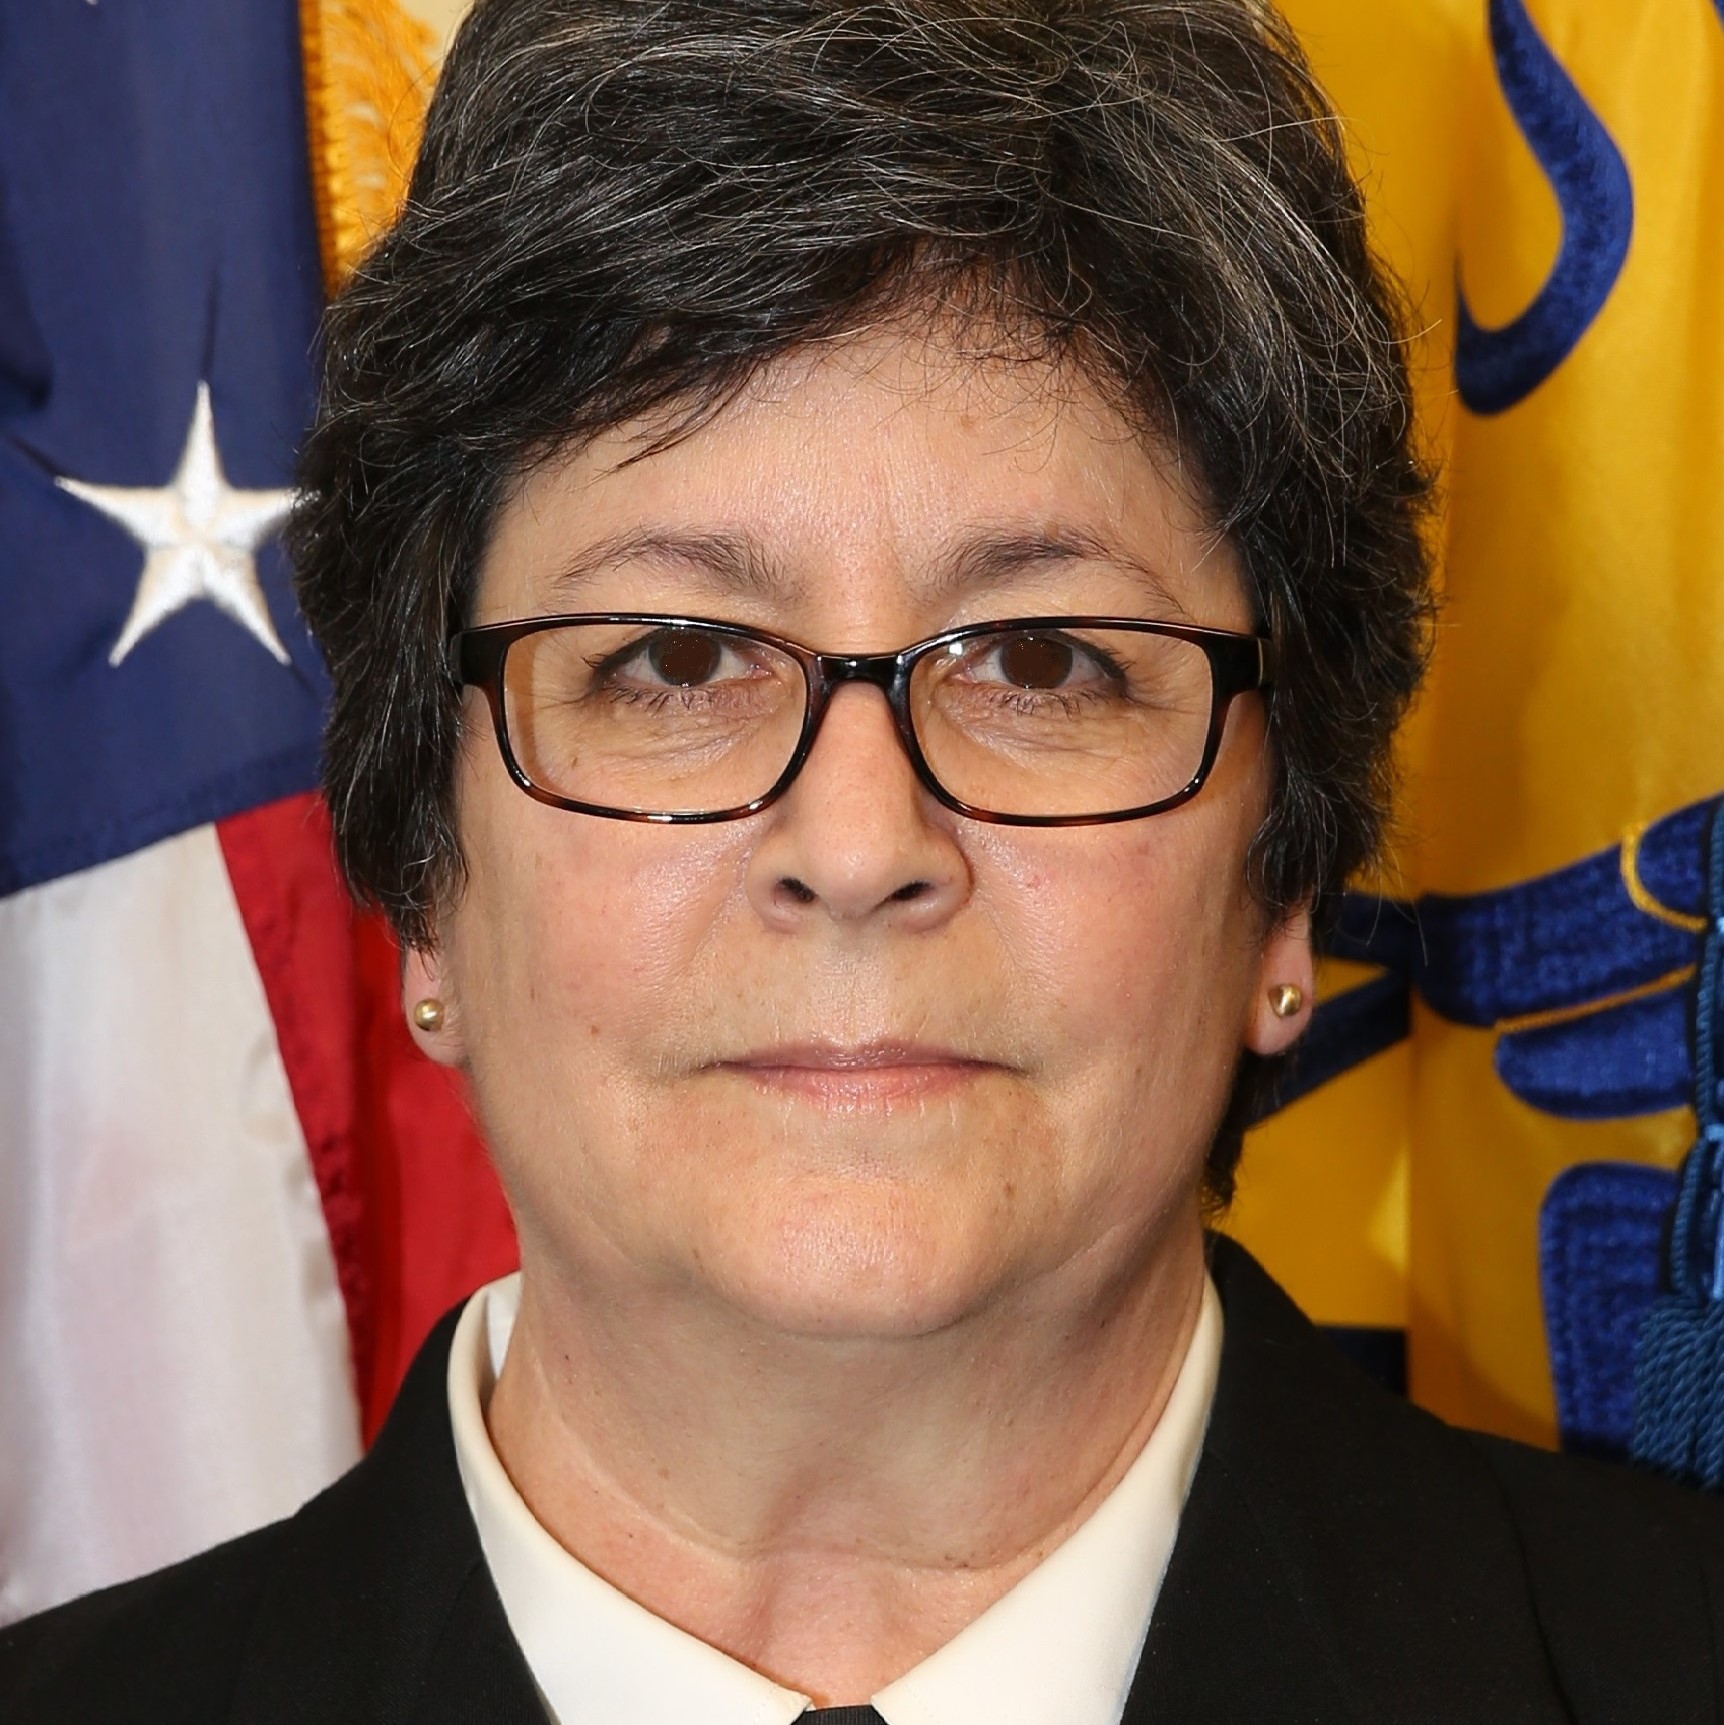 Rear Adm. Kelly M. Taylor, MS, REHS, Director, Division of Environmental Health Services, Office of Environmental Health and Engineering, Indian Health Service